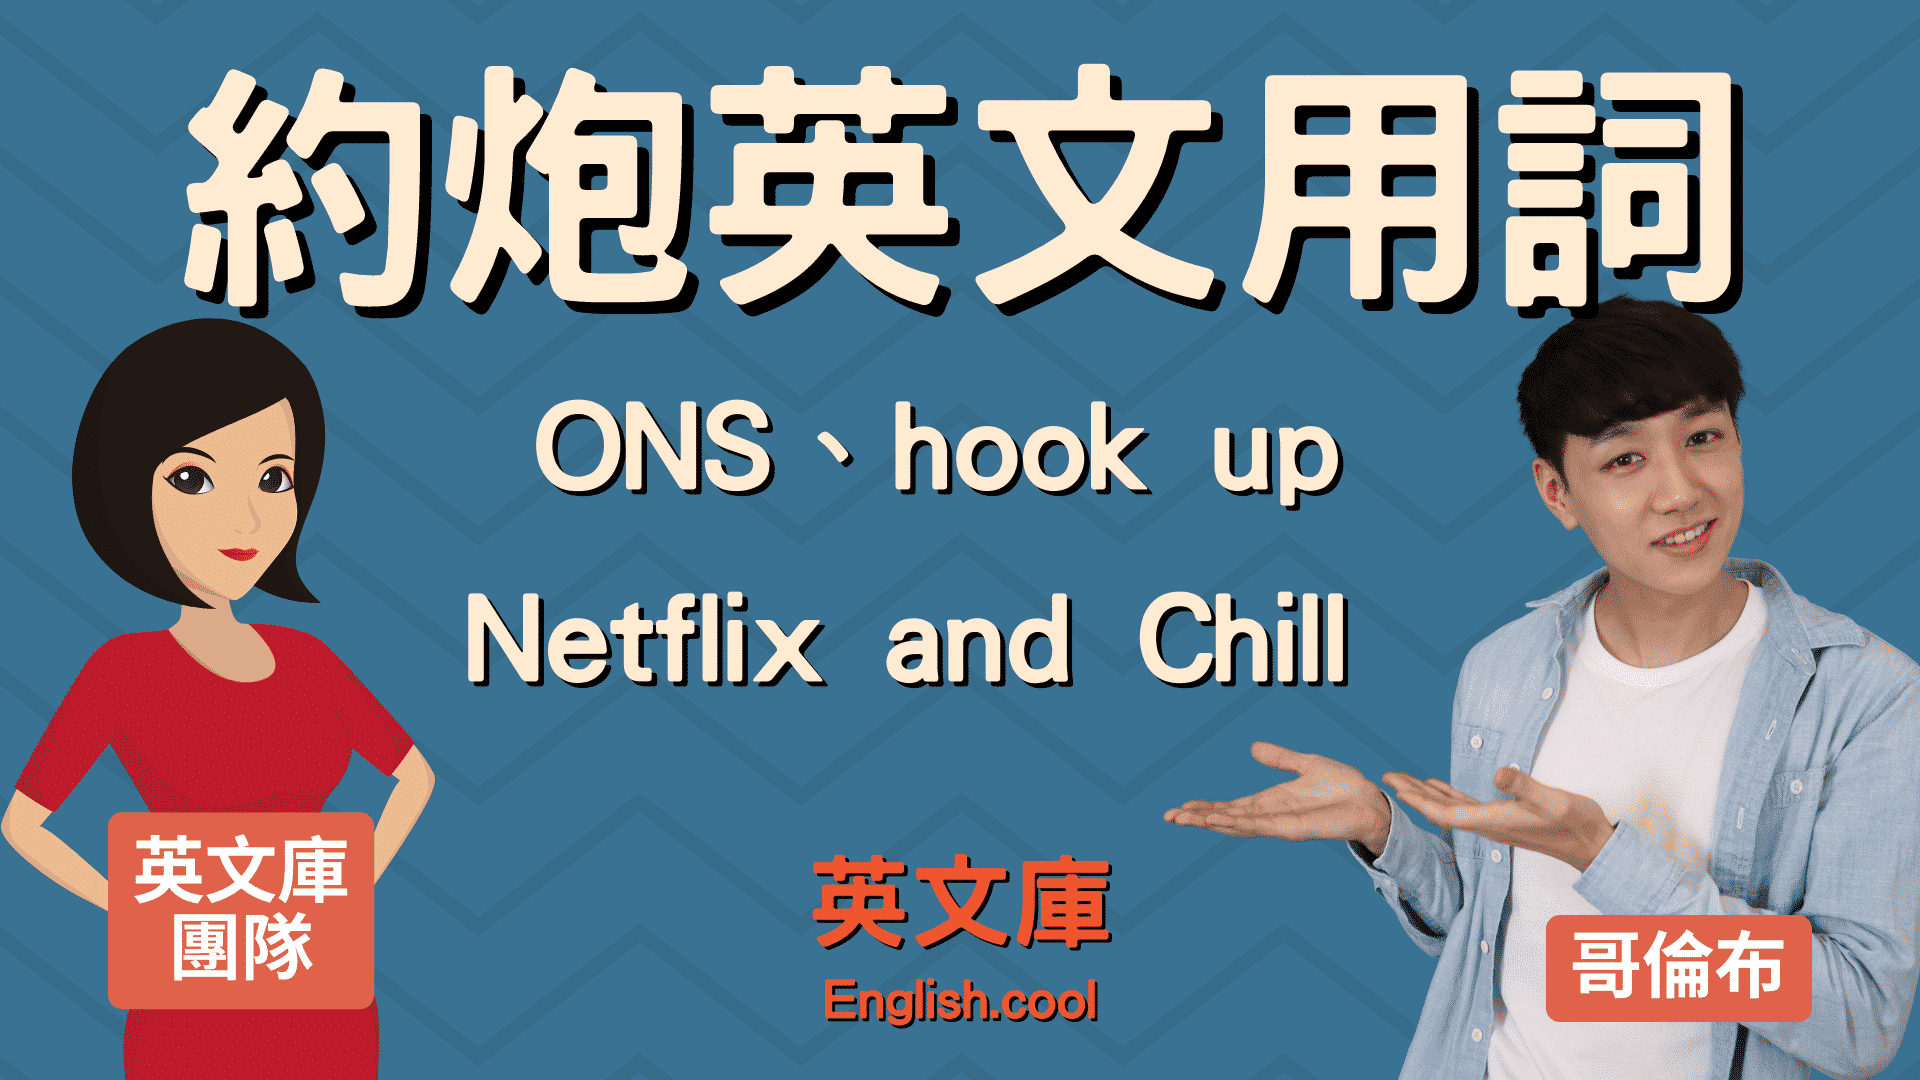 You are currently viewing 【約炮英文用詞】ONS、hook up、Netflix and Chill 的意思以及用法！